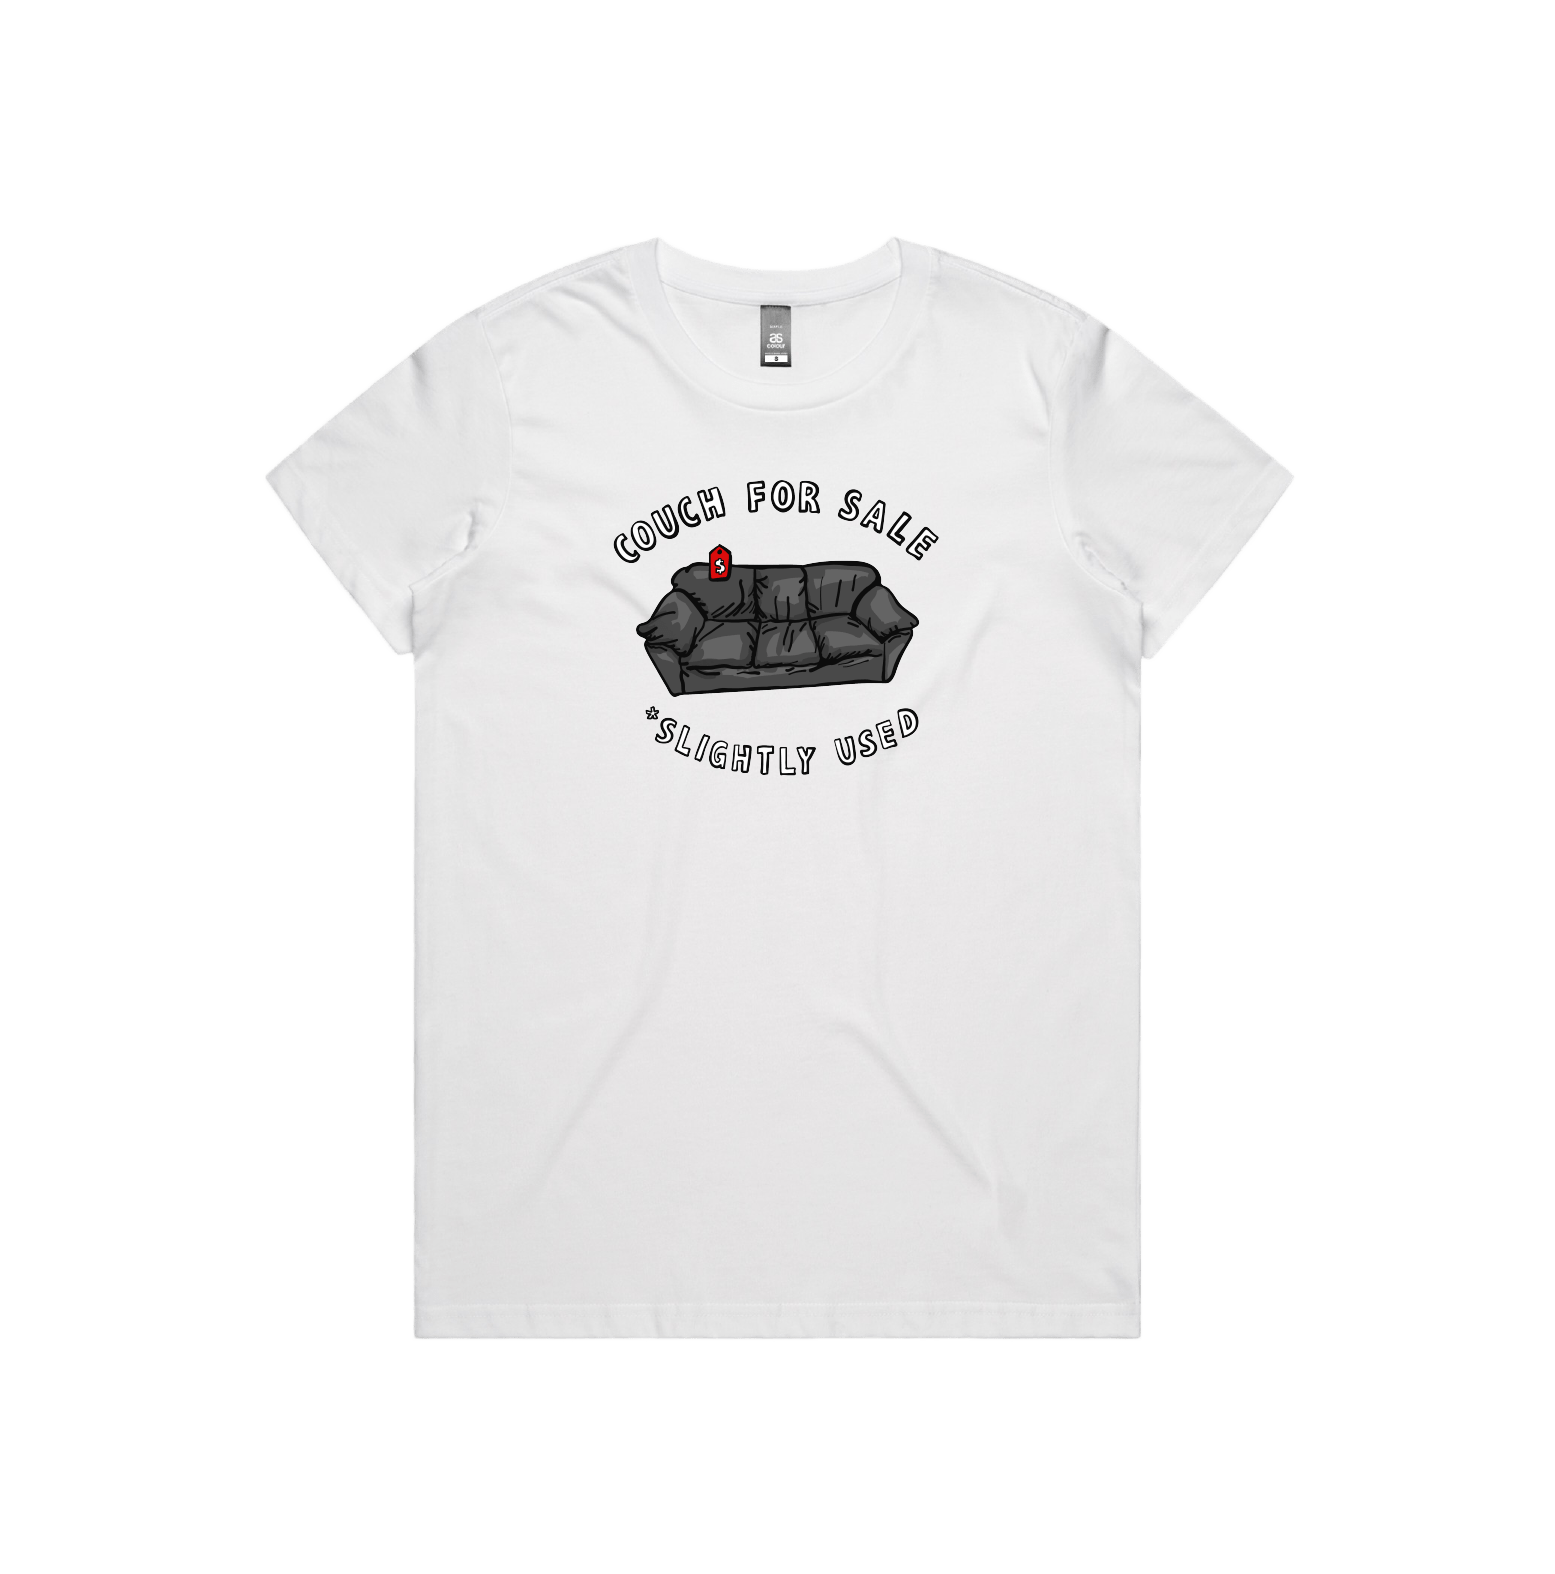 Casting Couch 📹 - Women's T Shirt